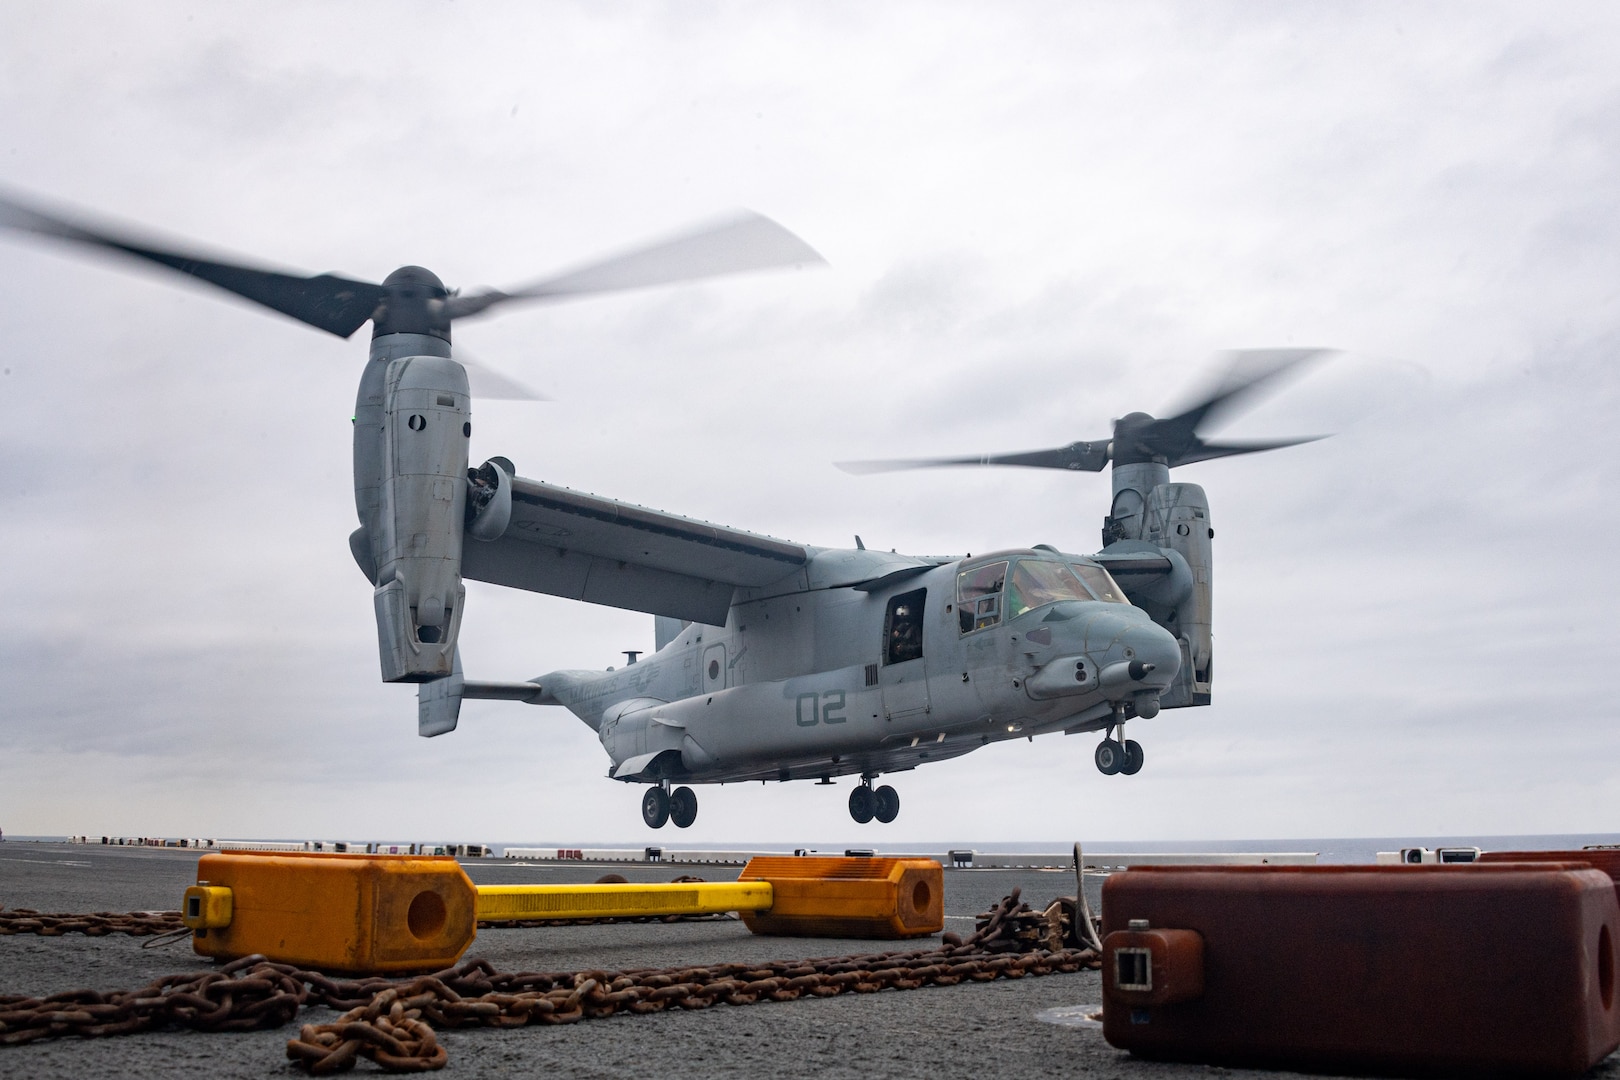 PHILIPPINE SEA (April 2, 2024) An MV-22B Osprey tiltrotor aircraft from Marine Medium Tiltrotor Squadron (VMM) 262, lands on the flight deck of the forward-deployed amphibious assault carrier USS America (LHA 6), while conducting routine operations in the Philippine Sea, April 2. America, lead ship of the America Amphibious Ready Group, is operating in the U.S. 7th Fleet area of operations. U.S. 7th Fleet is the U.S. Navy’s largest forward-deployed numbered fleet, and routinely interacts and operates with allies and partners in preserving a free and open Indo-Pacific region.  (U.S. Navy photo by Mass Communication Specialist 2nd Class Cole Pursley)